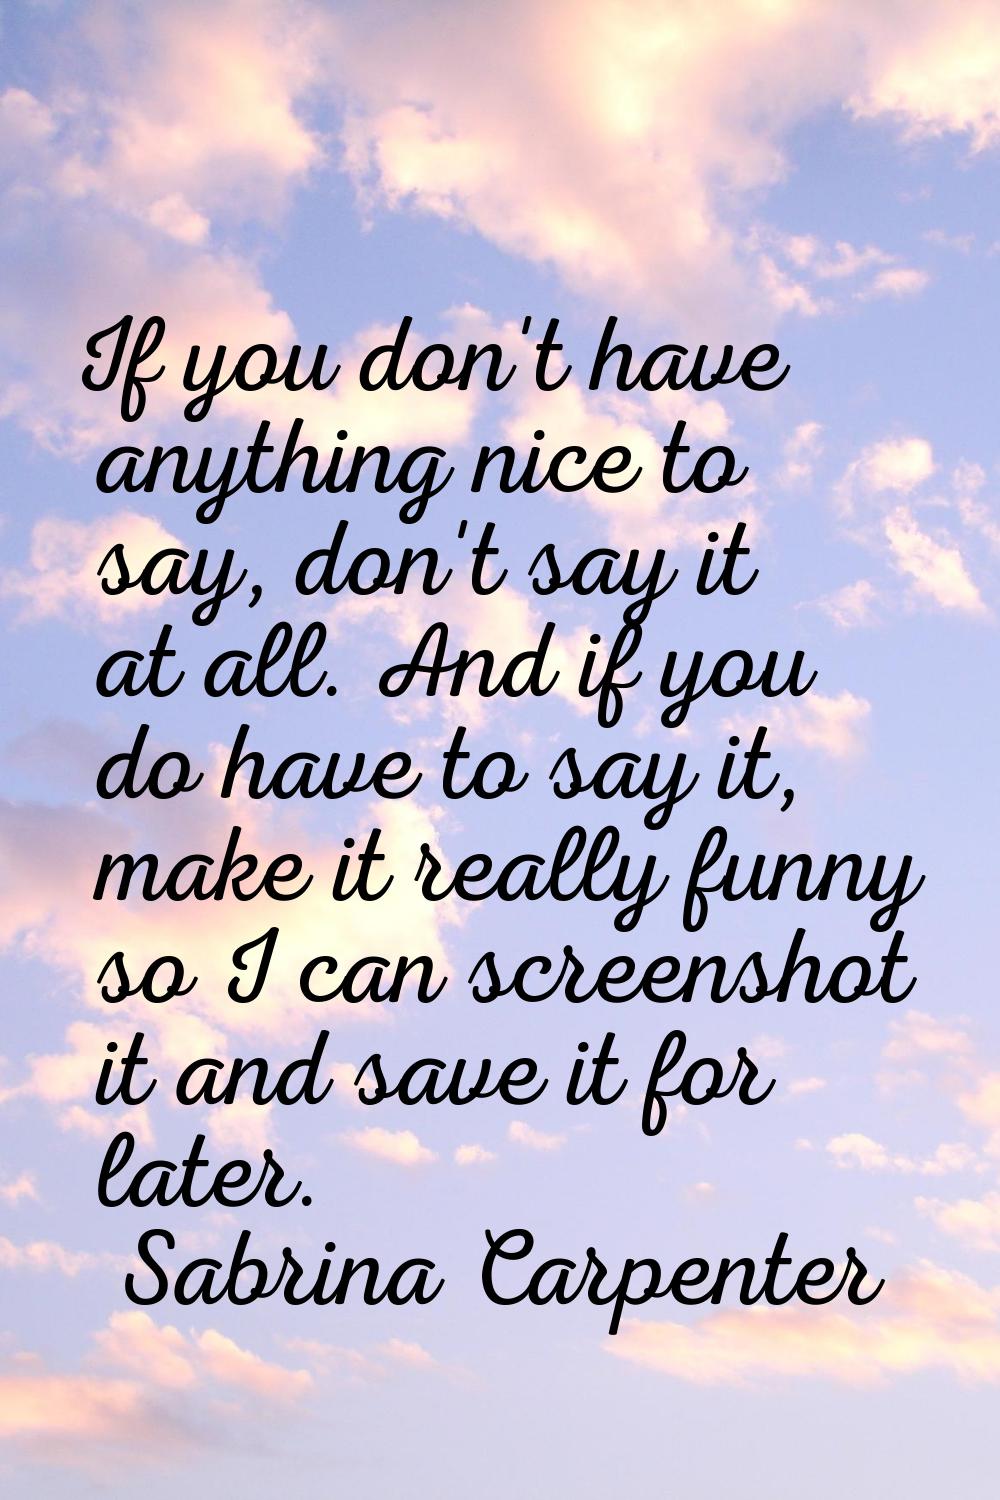 If you don't have anything nice to say, don't say it at all. And if you do have to say it, make it 